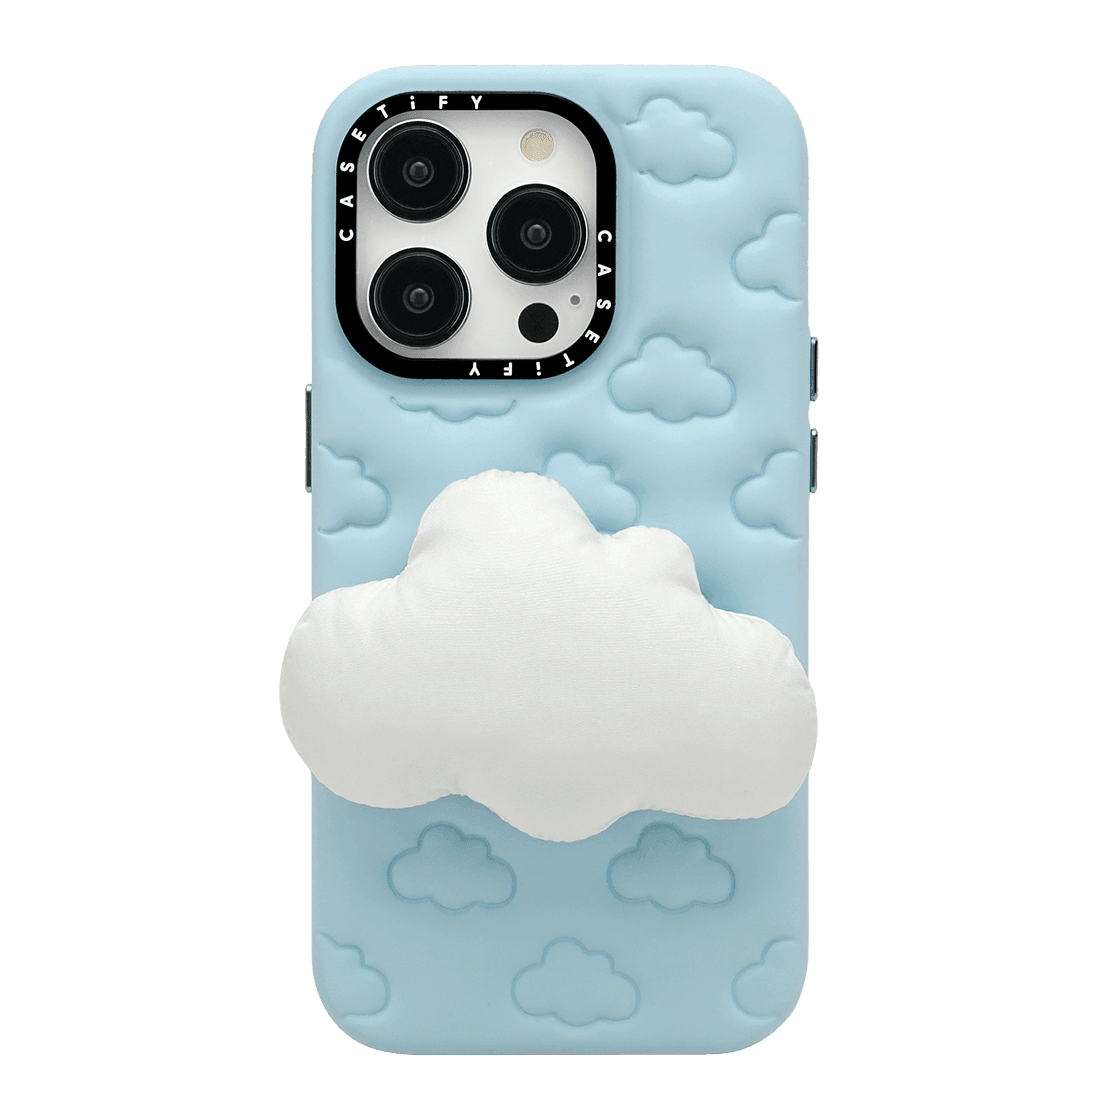 【WIND AND SEA】casetify iPhone11 ケース